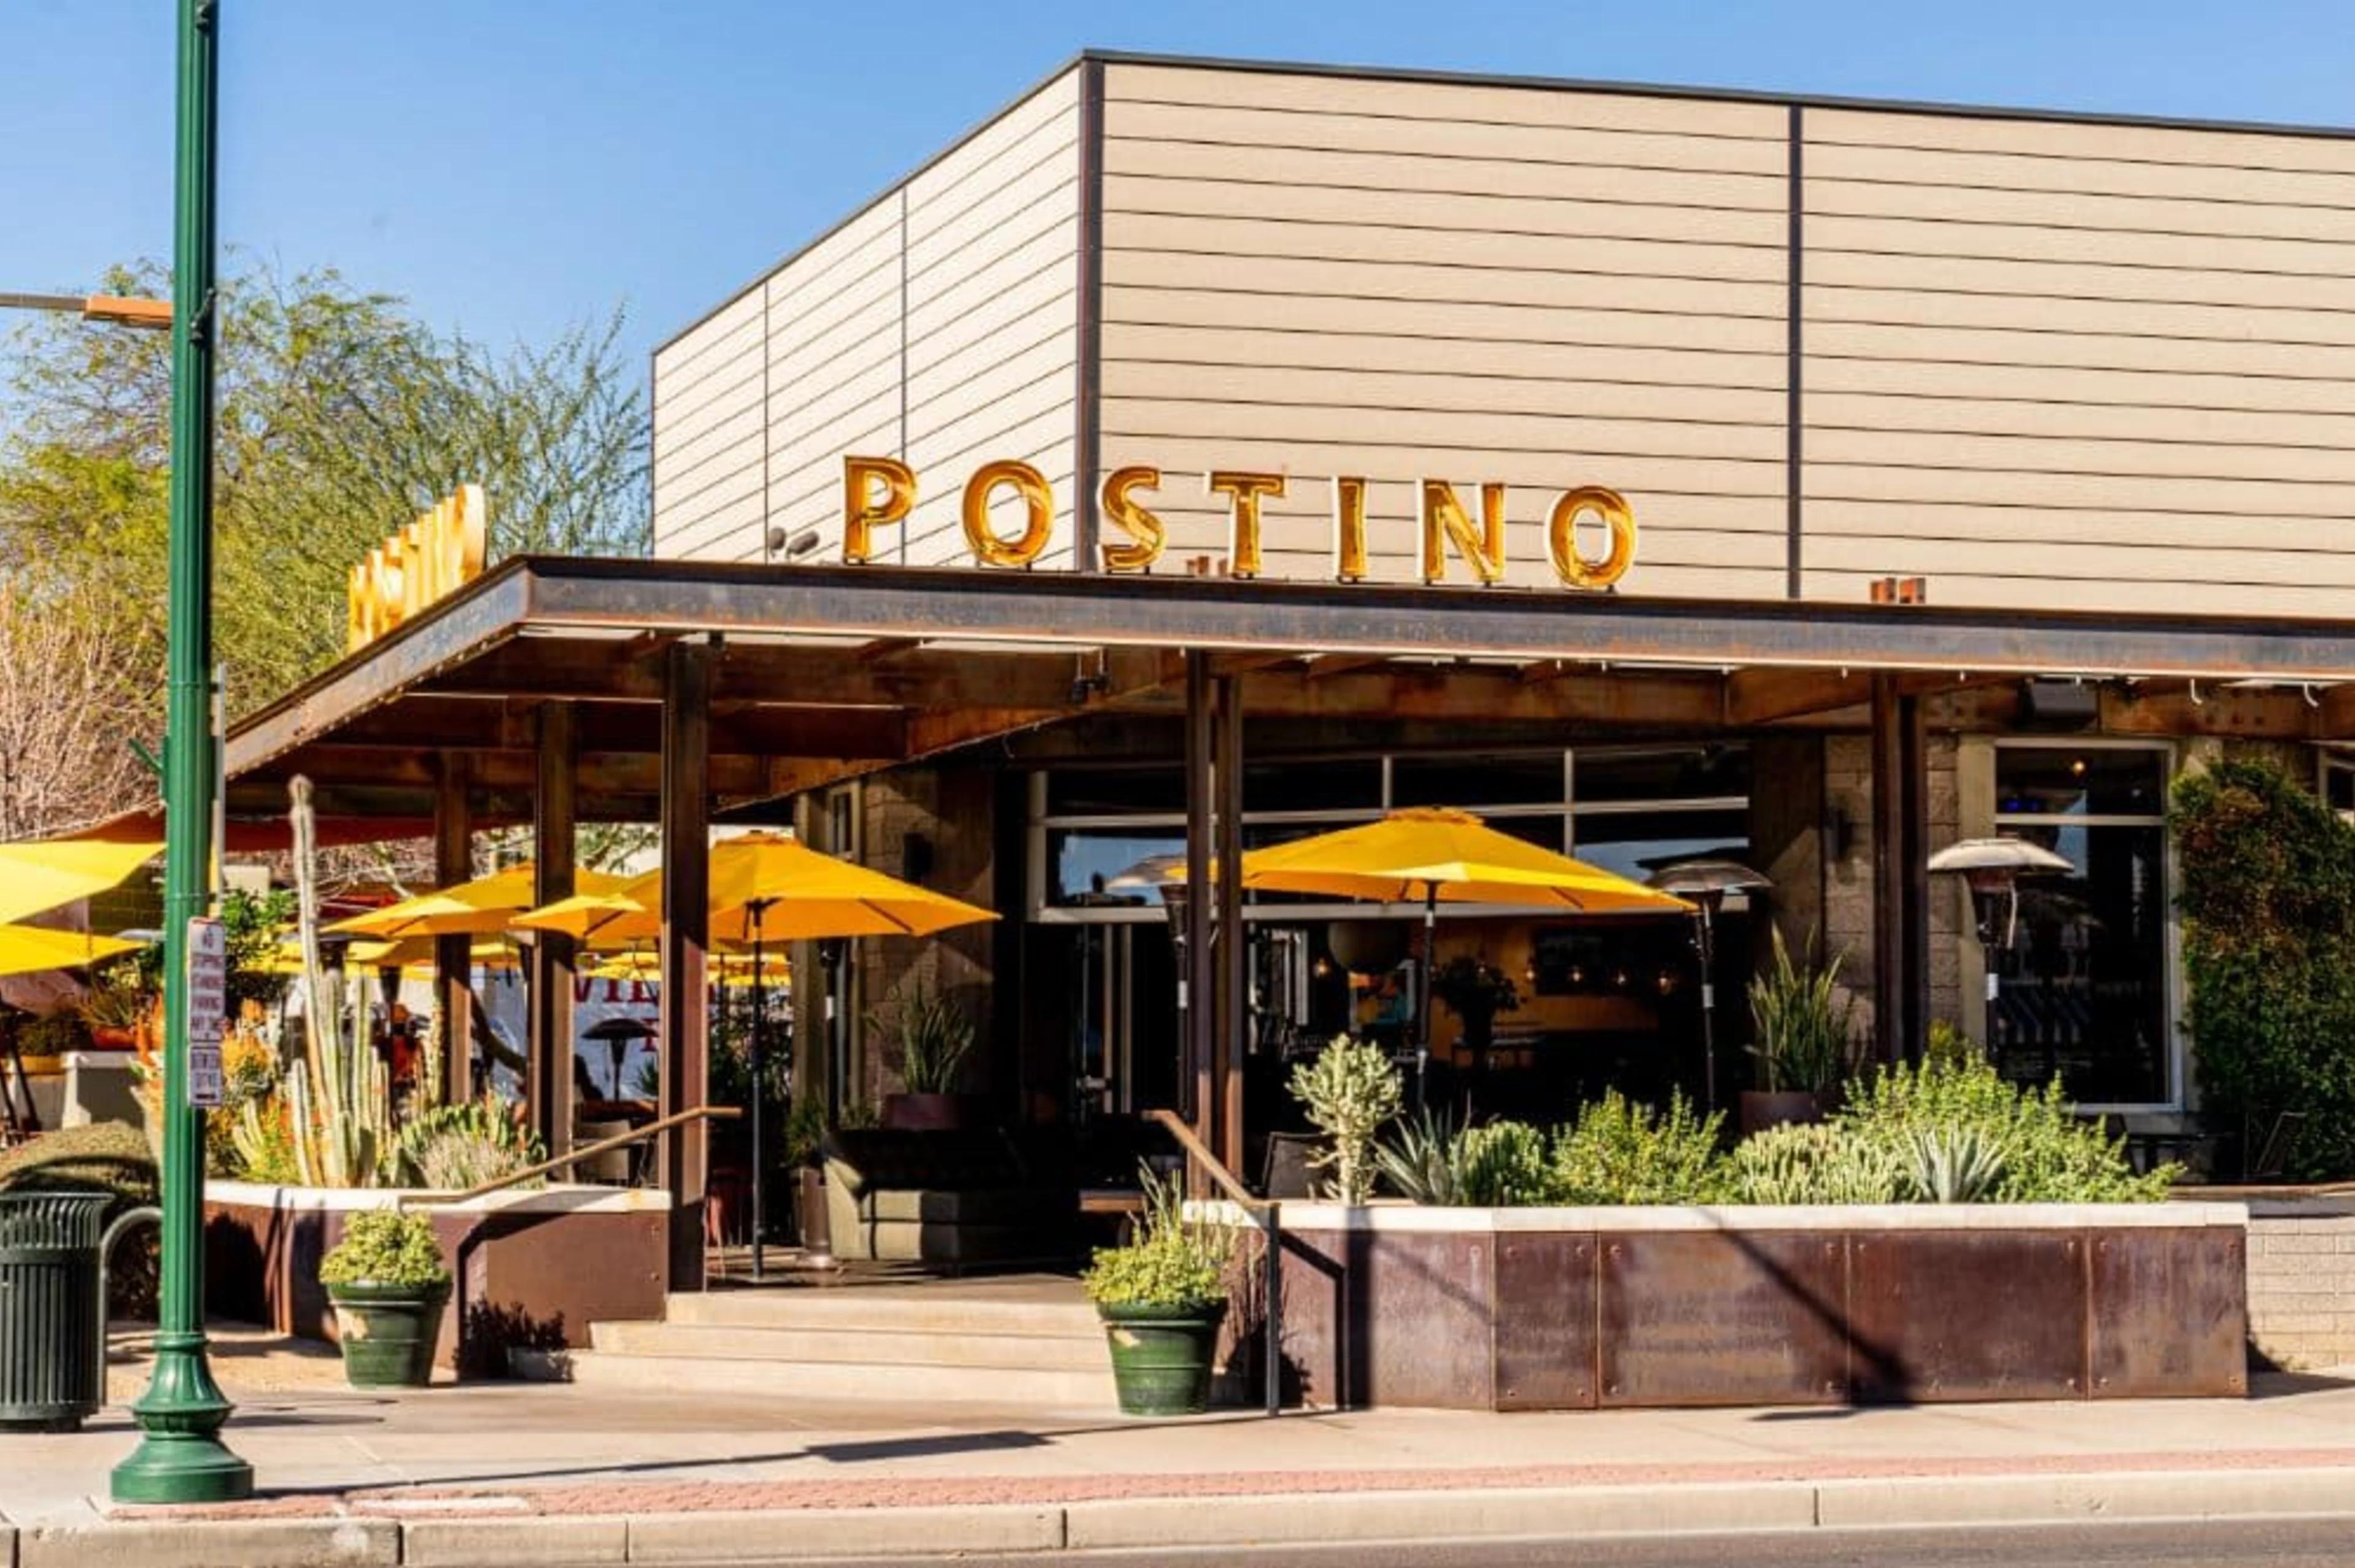 Building with yellow umbrellas and a Postino sign